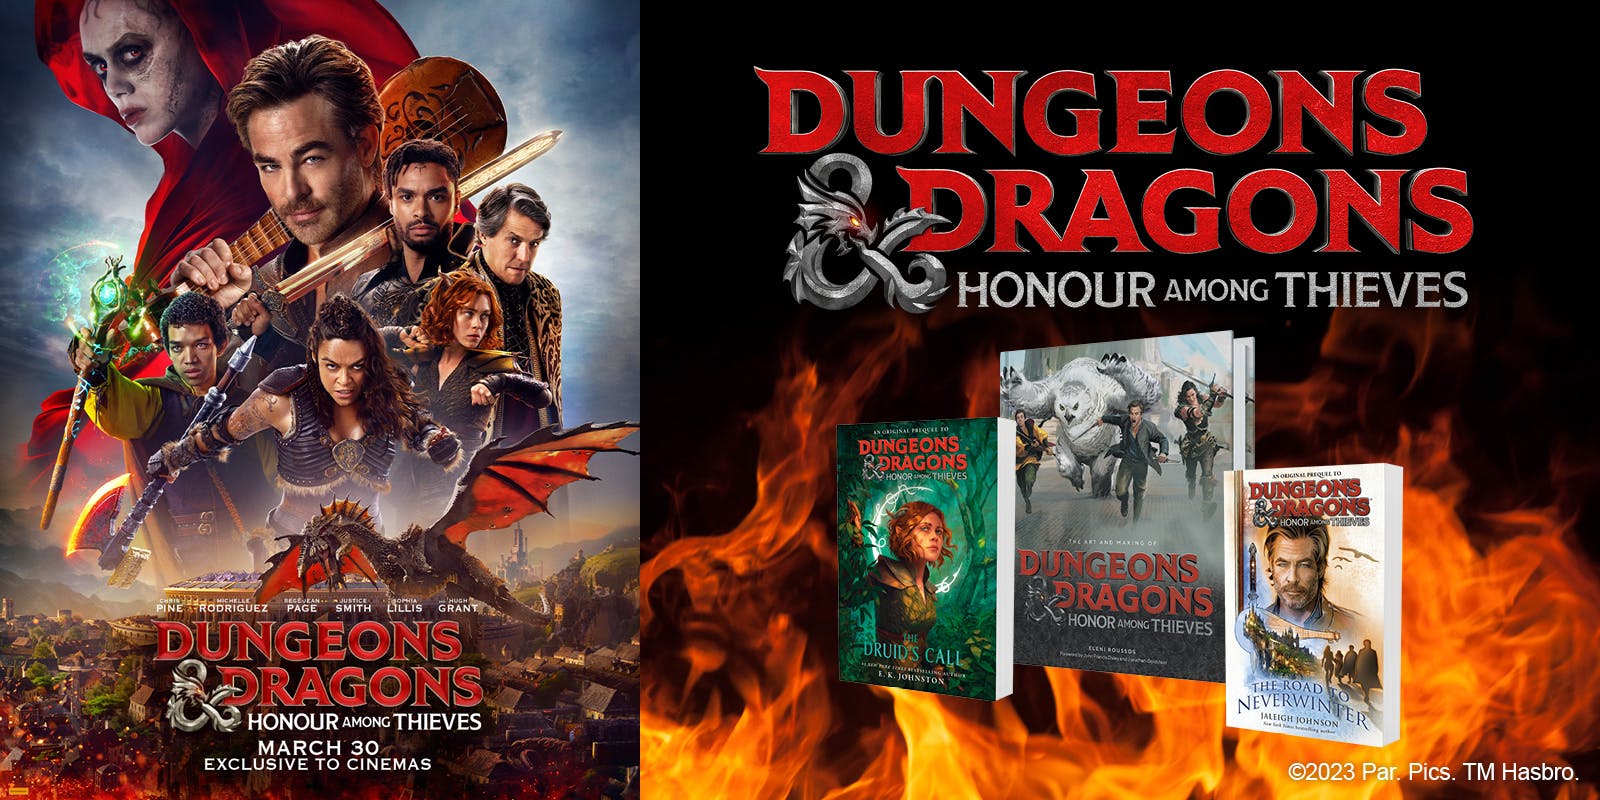 Dungeons & Dragons: Honor Among Thieves (2023) - Movie